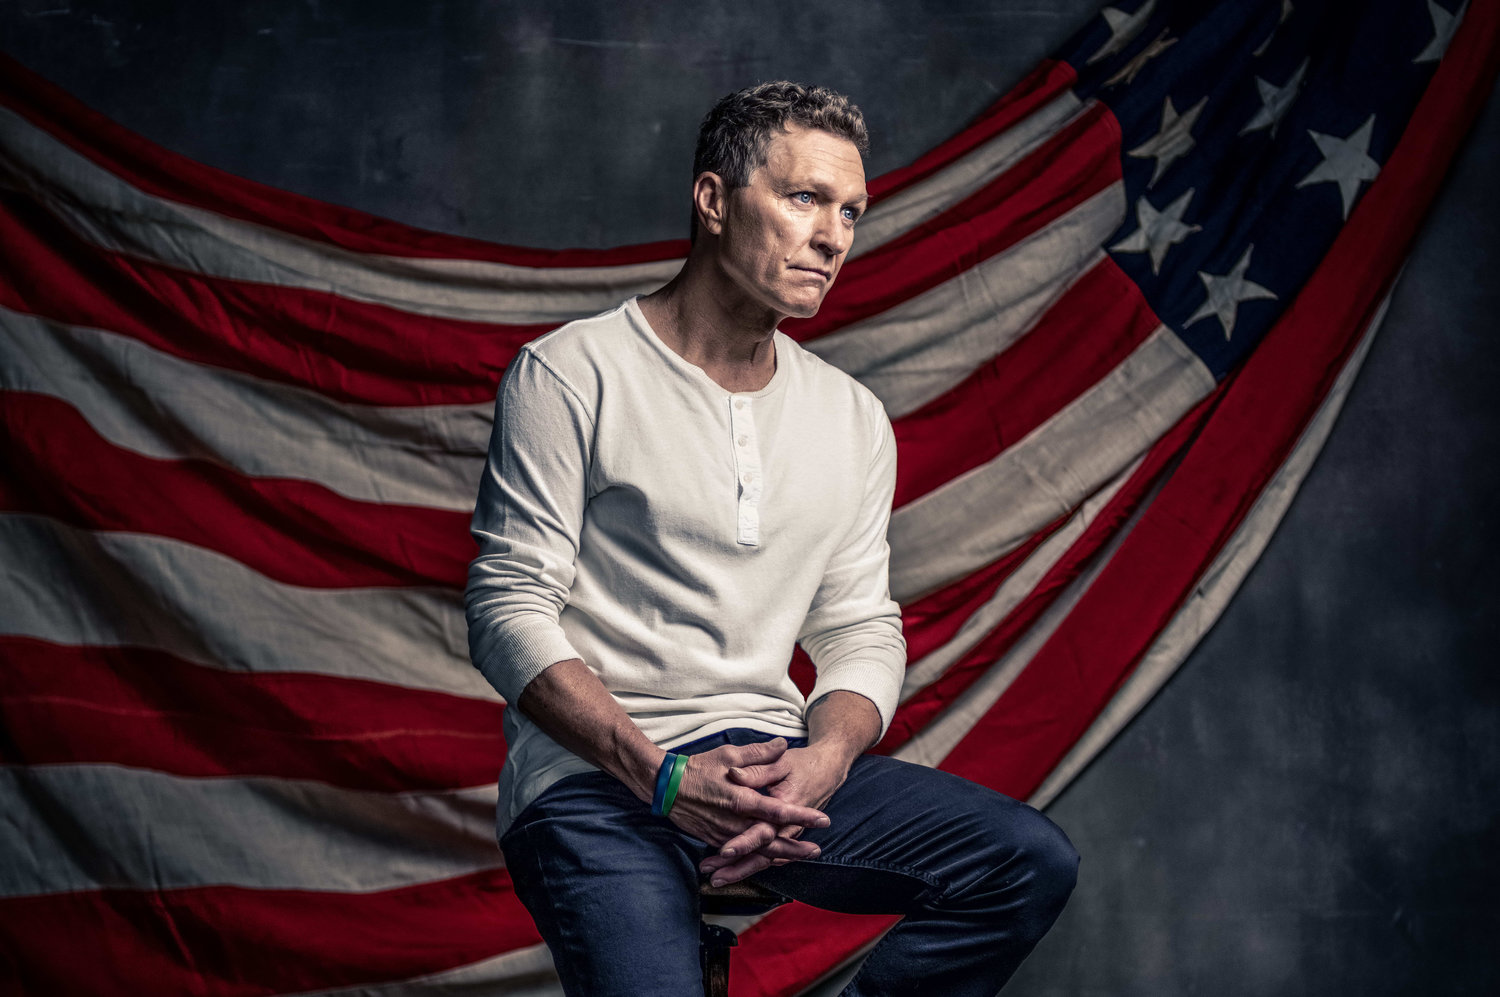 Headlining the main stage during this year’s event on Saturday, July 31 is country music icon Craig Morgan.